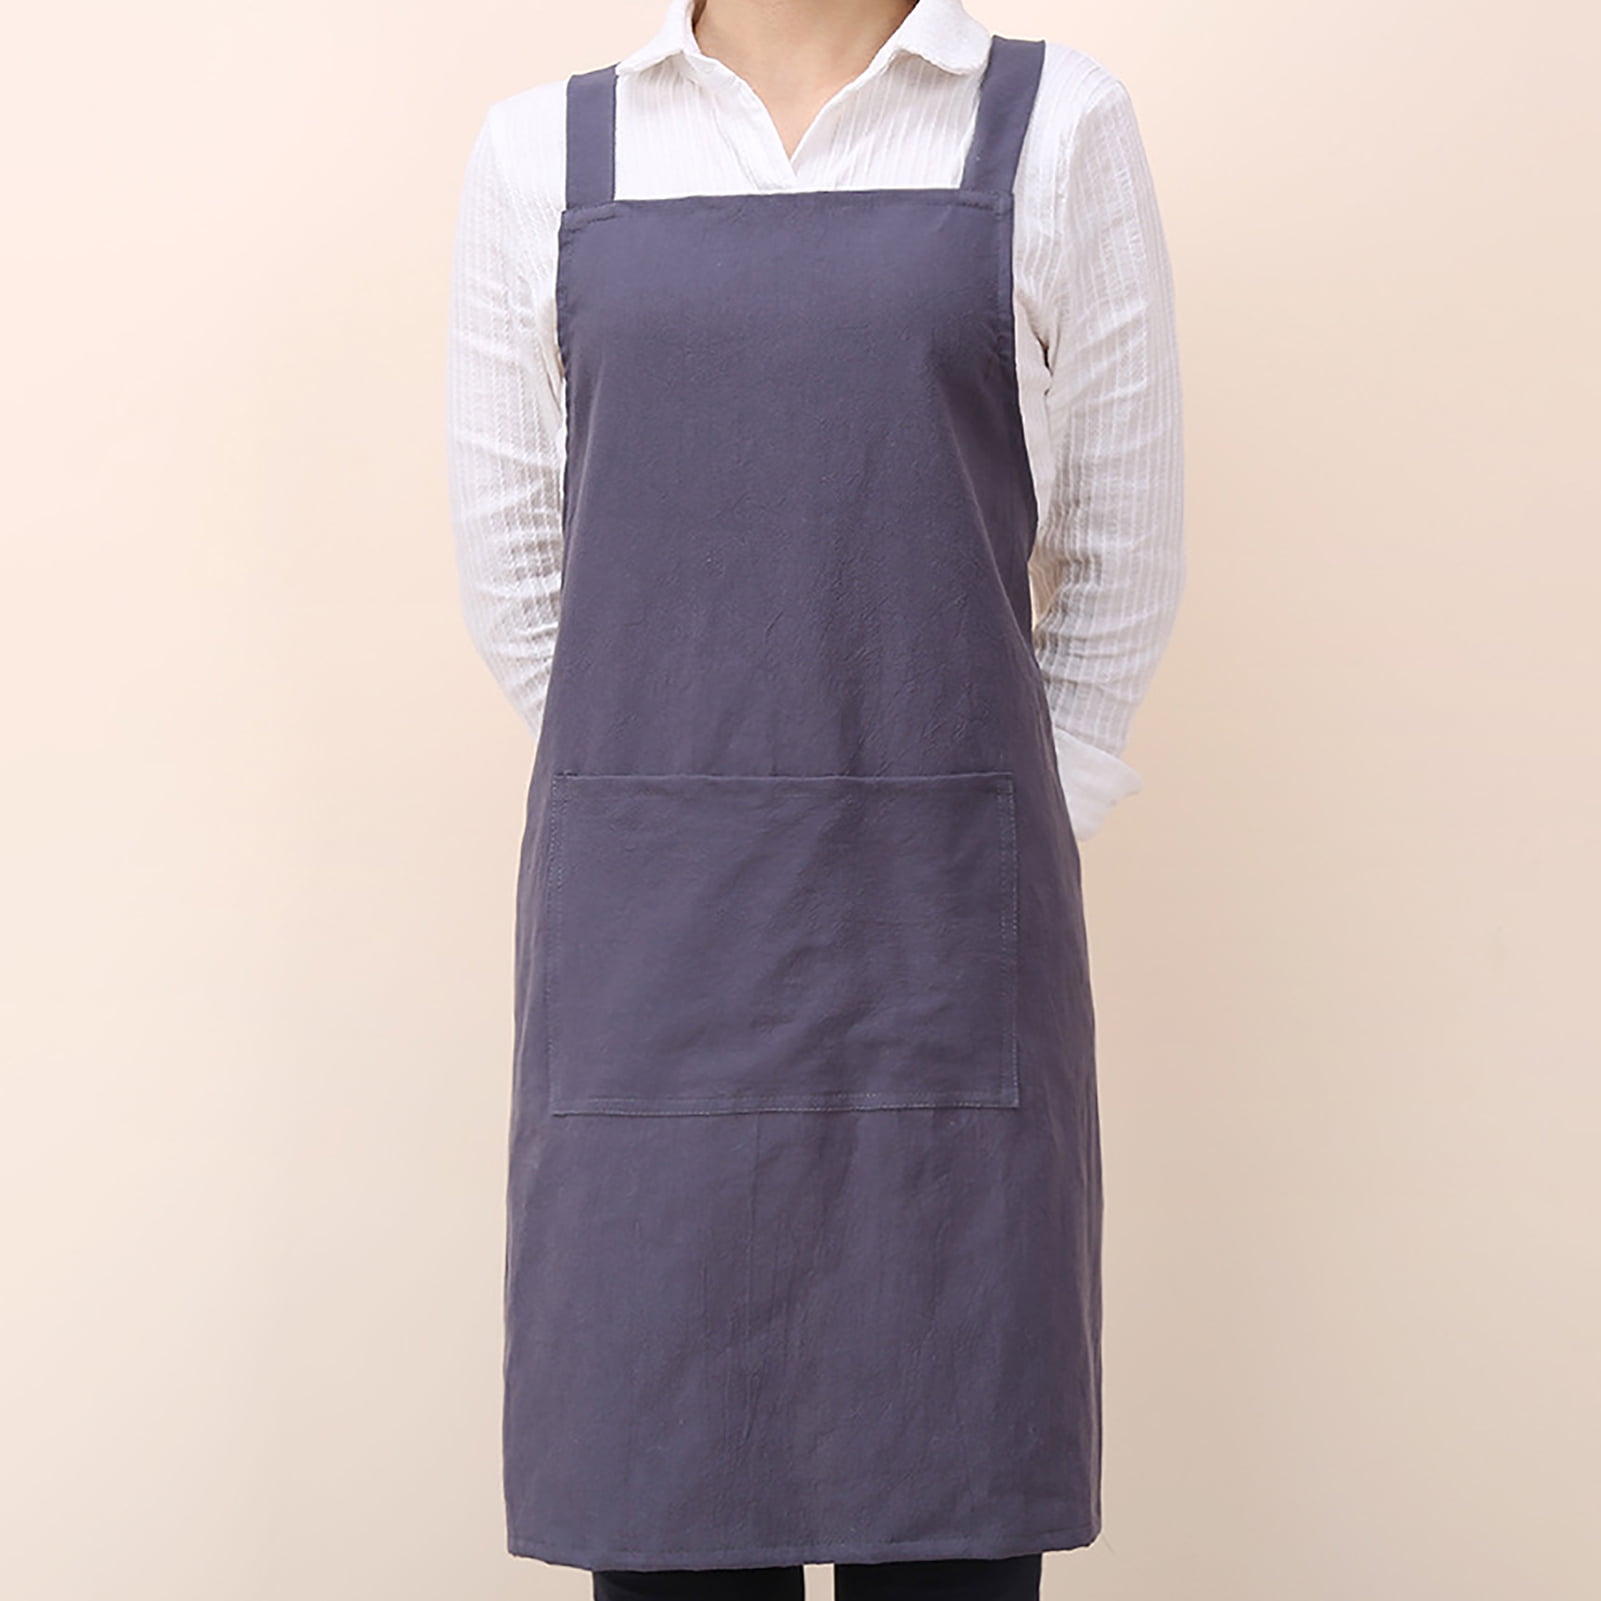 Details about   1Pc Cooking Aprons Adjustable Simple Dining Cactus Printing Sleeveless Washable 